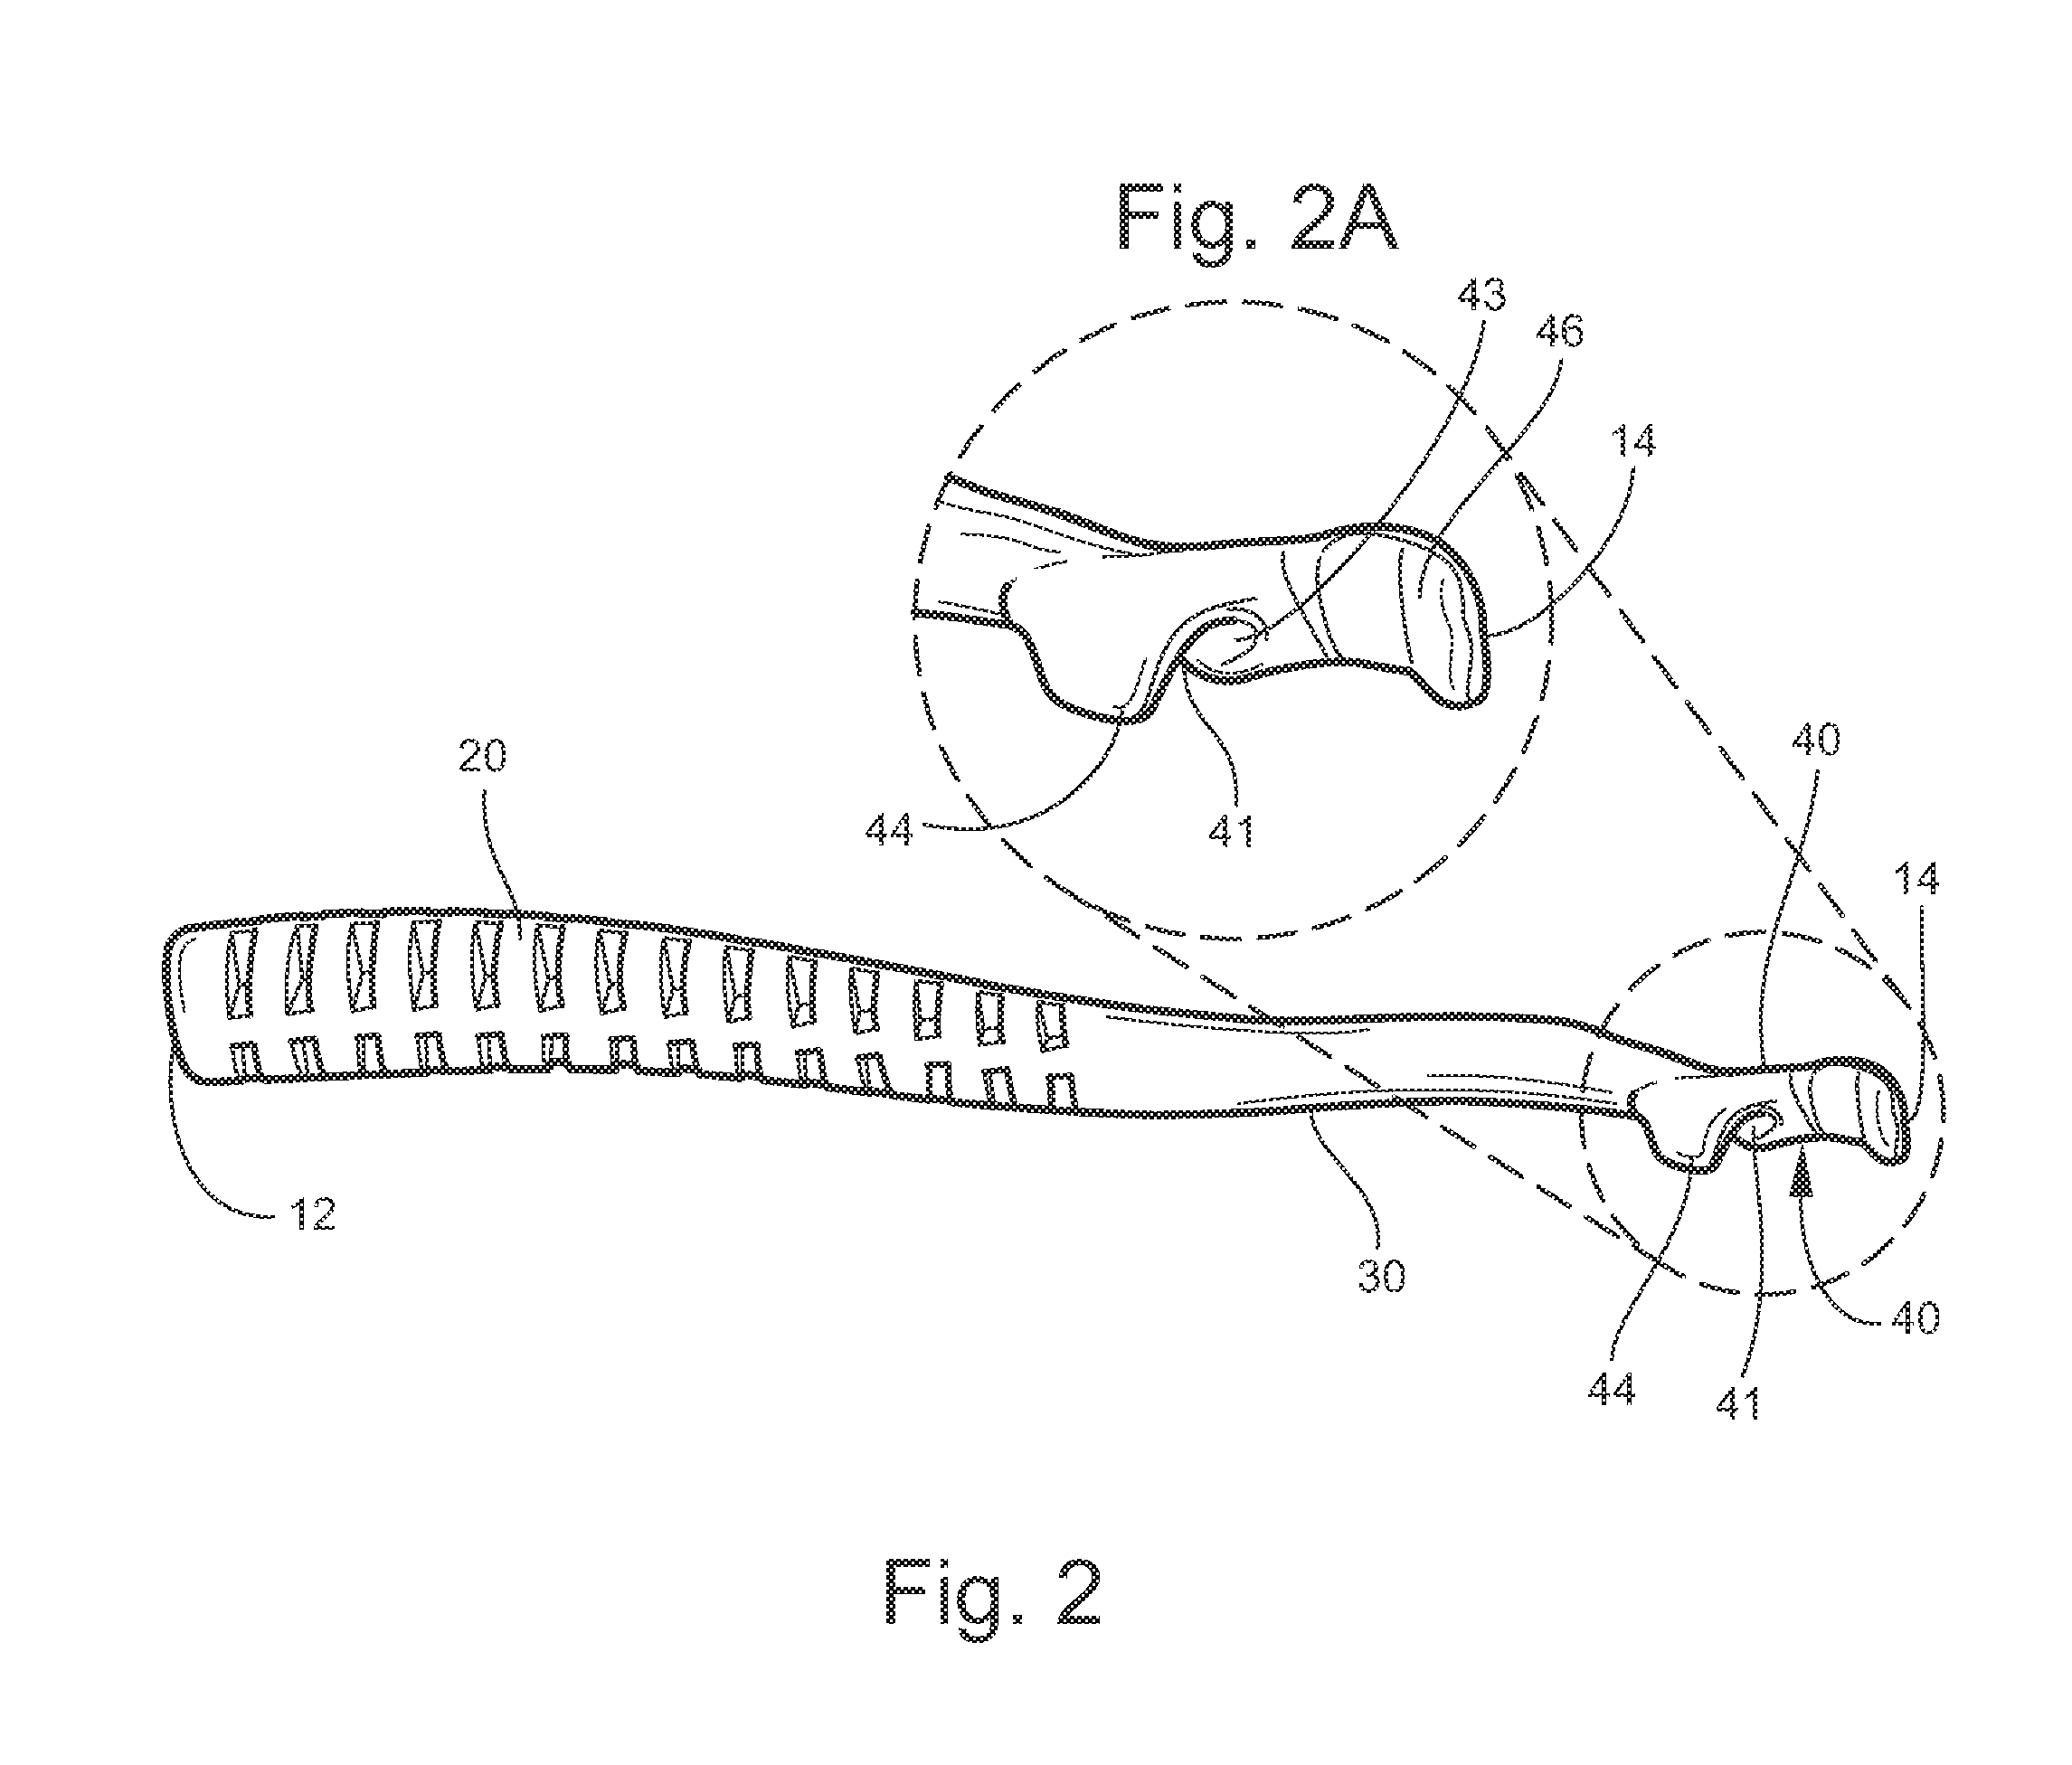 Surgical instrument and method of using same